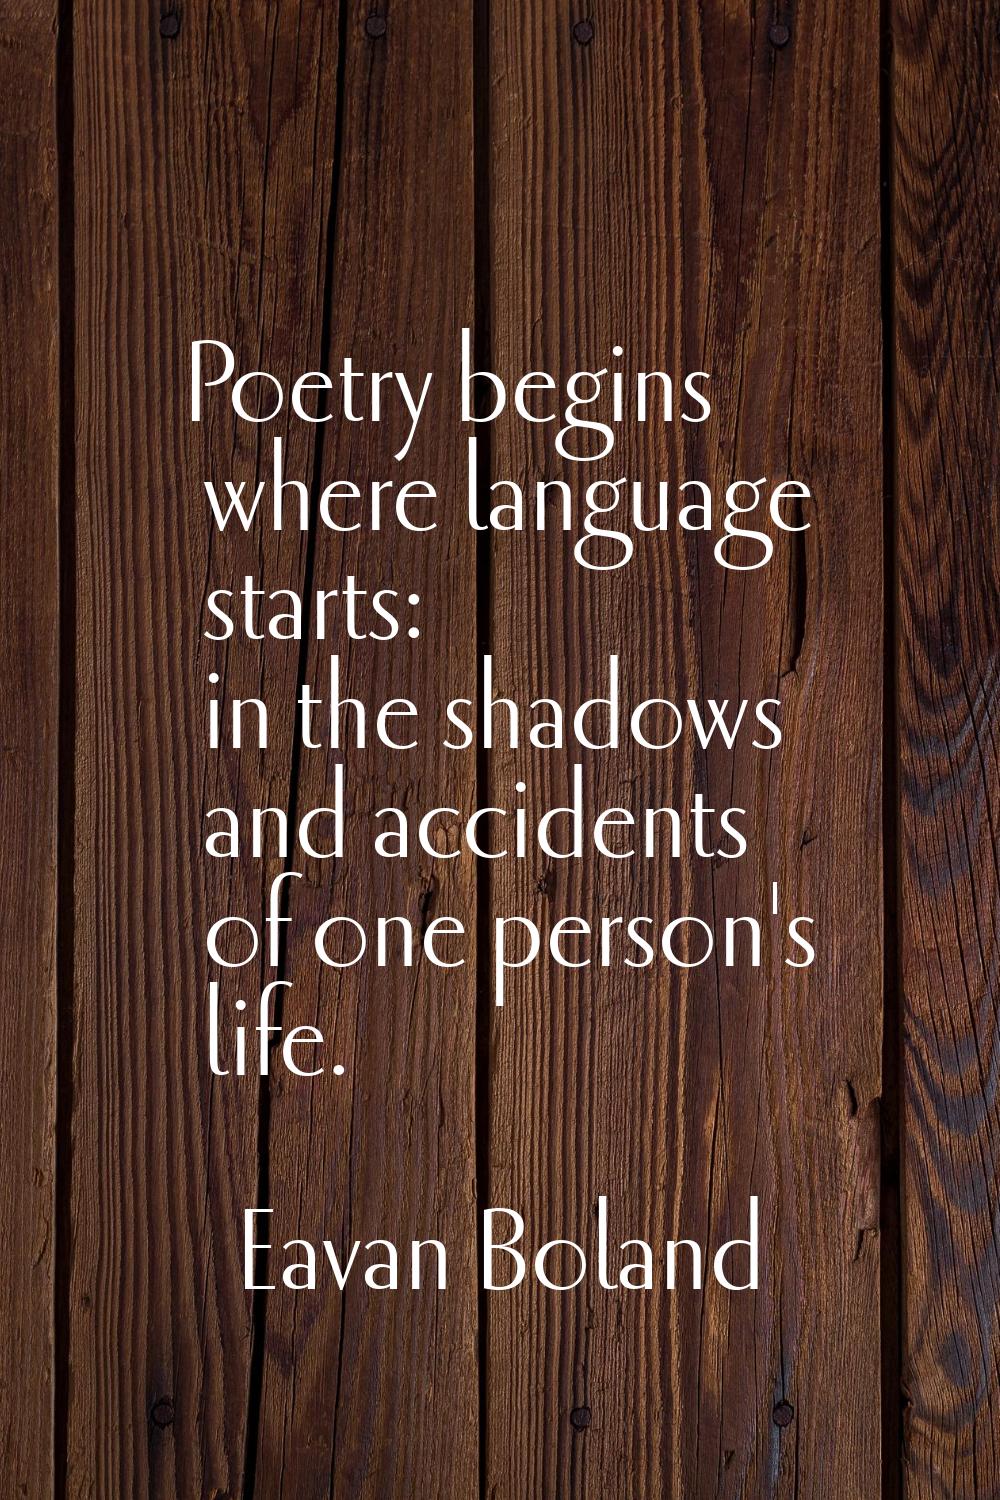 Poetry begins where language starts: in the shadows and accidents of one person's life.